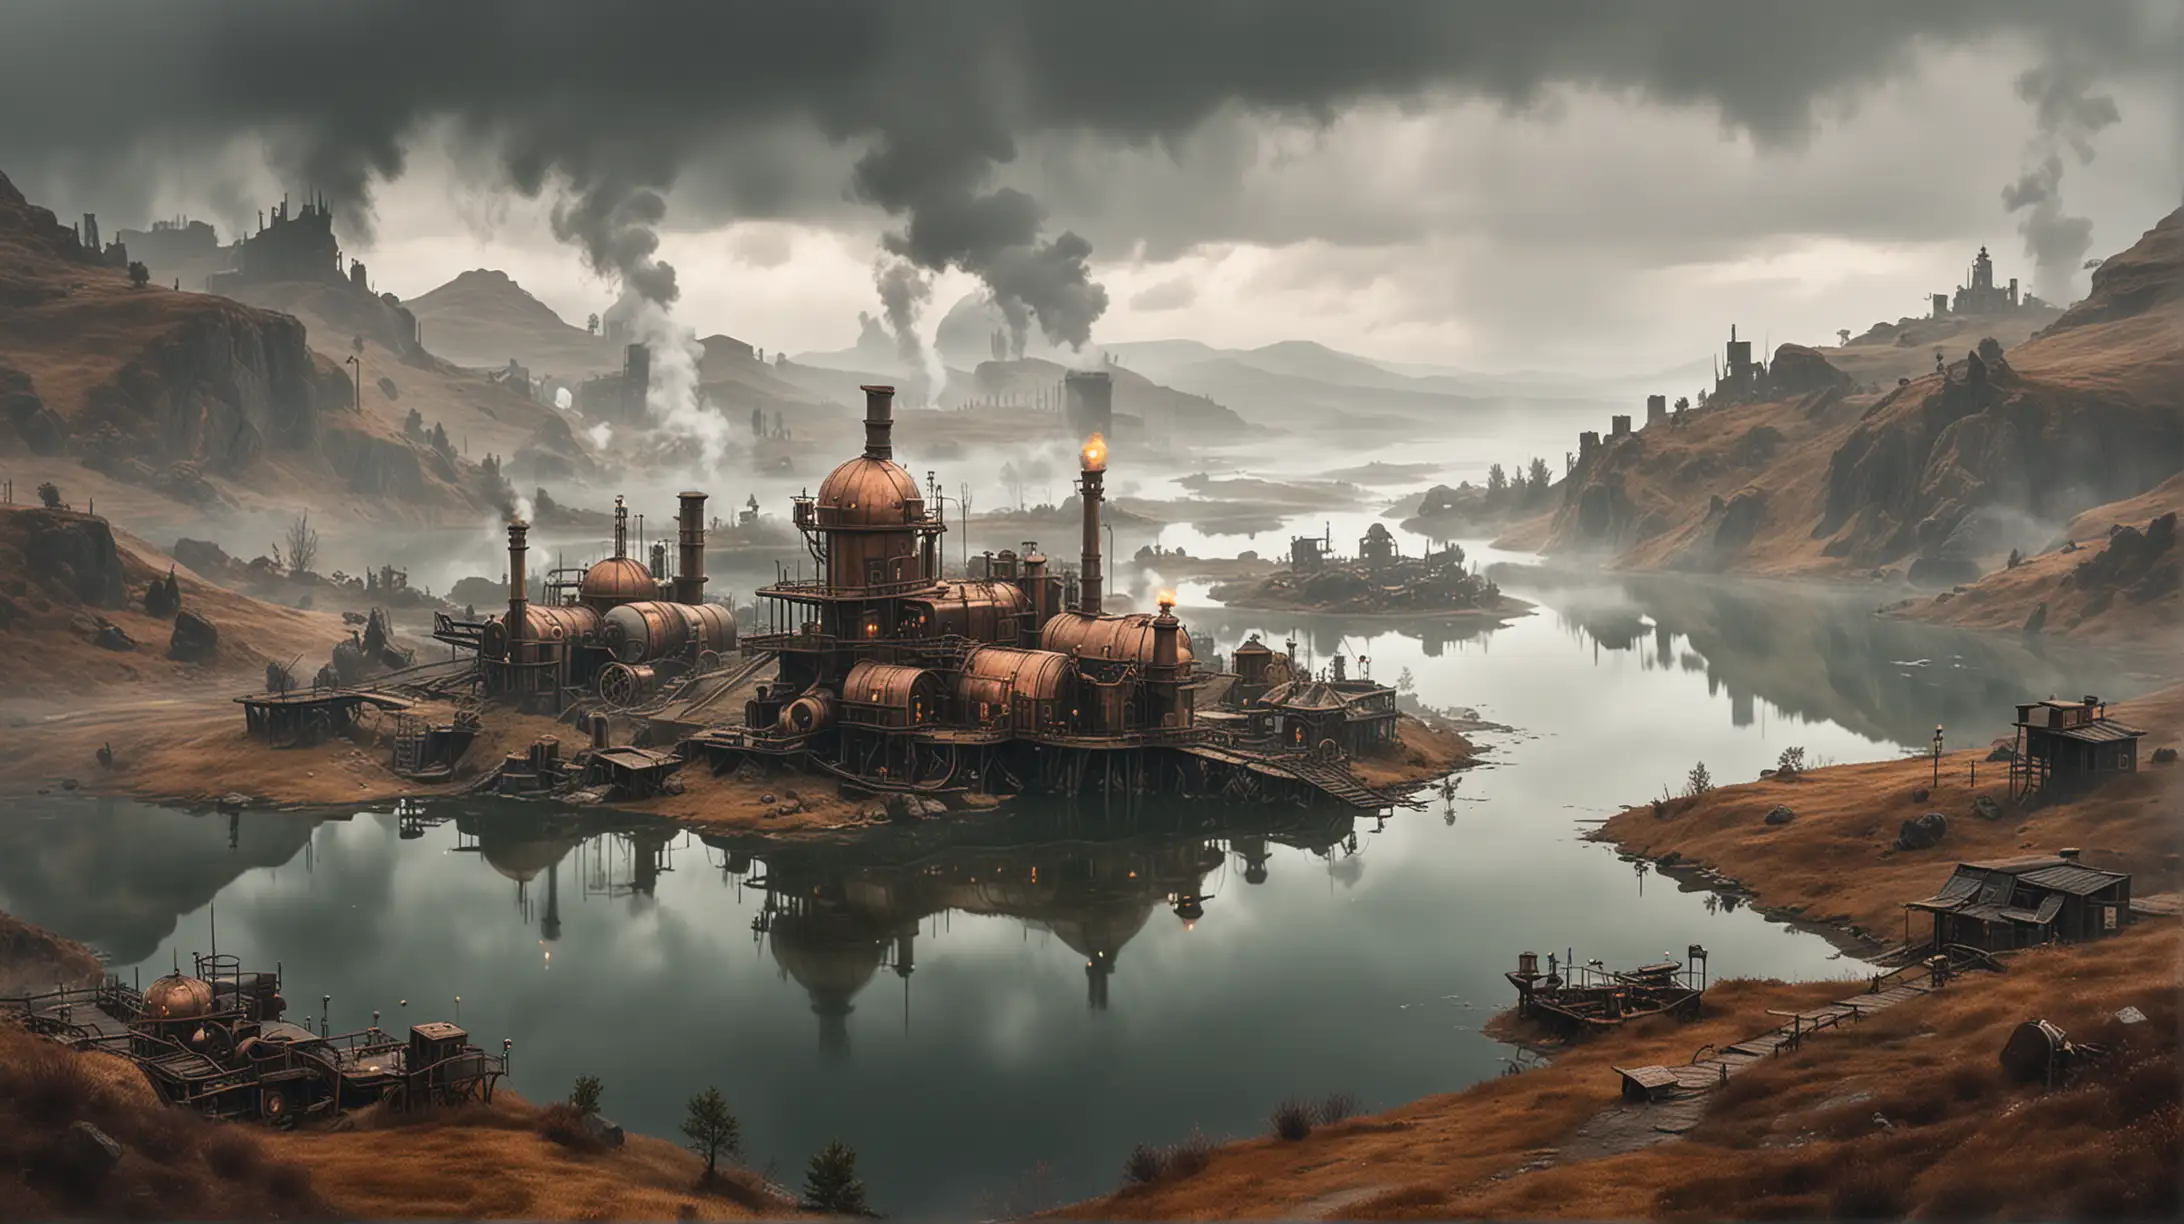 a small steampunk colony placed between two wild lakes, steam, fog, smoke, copper, brass, glass, cloudy and rainy, distant view from a high hill